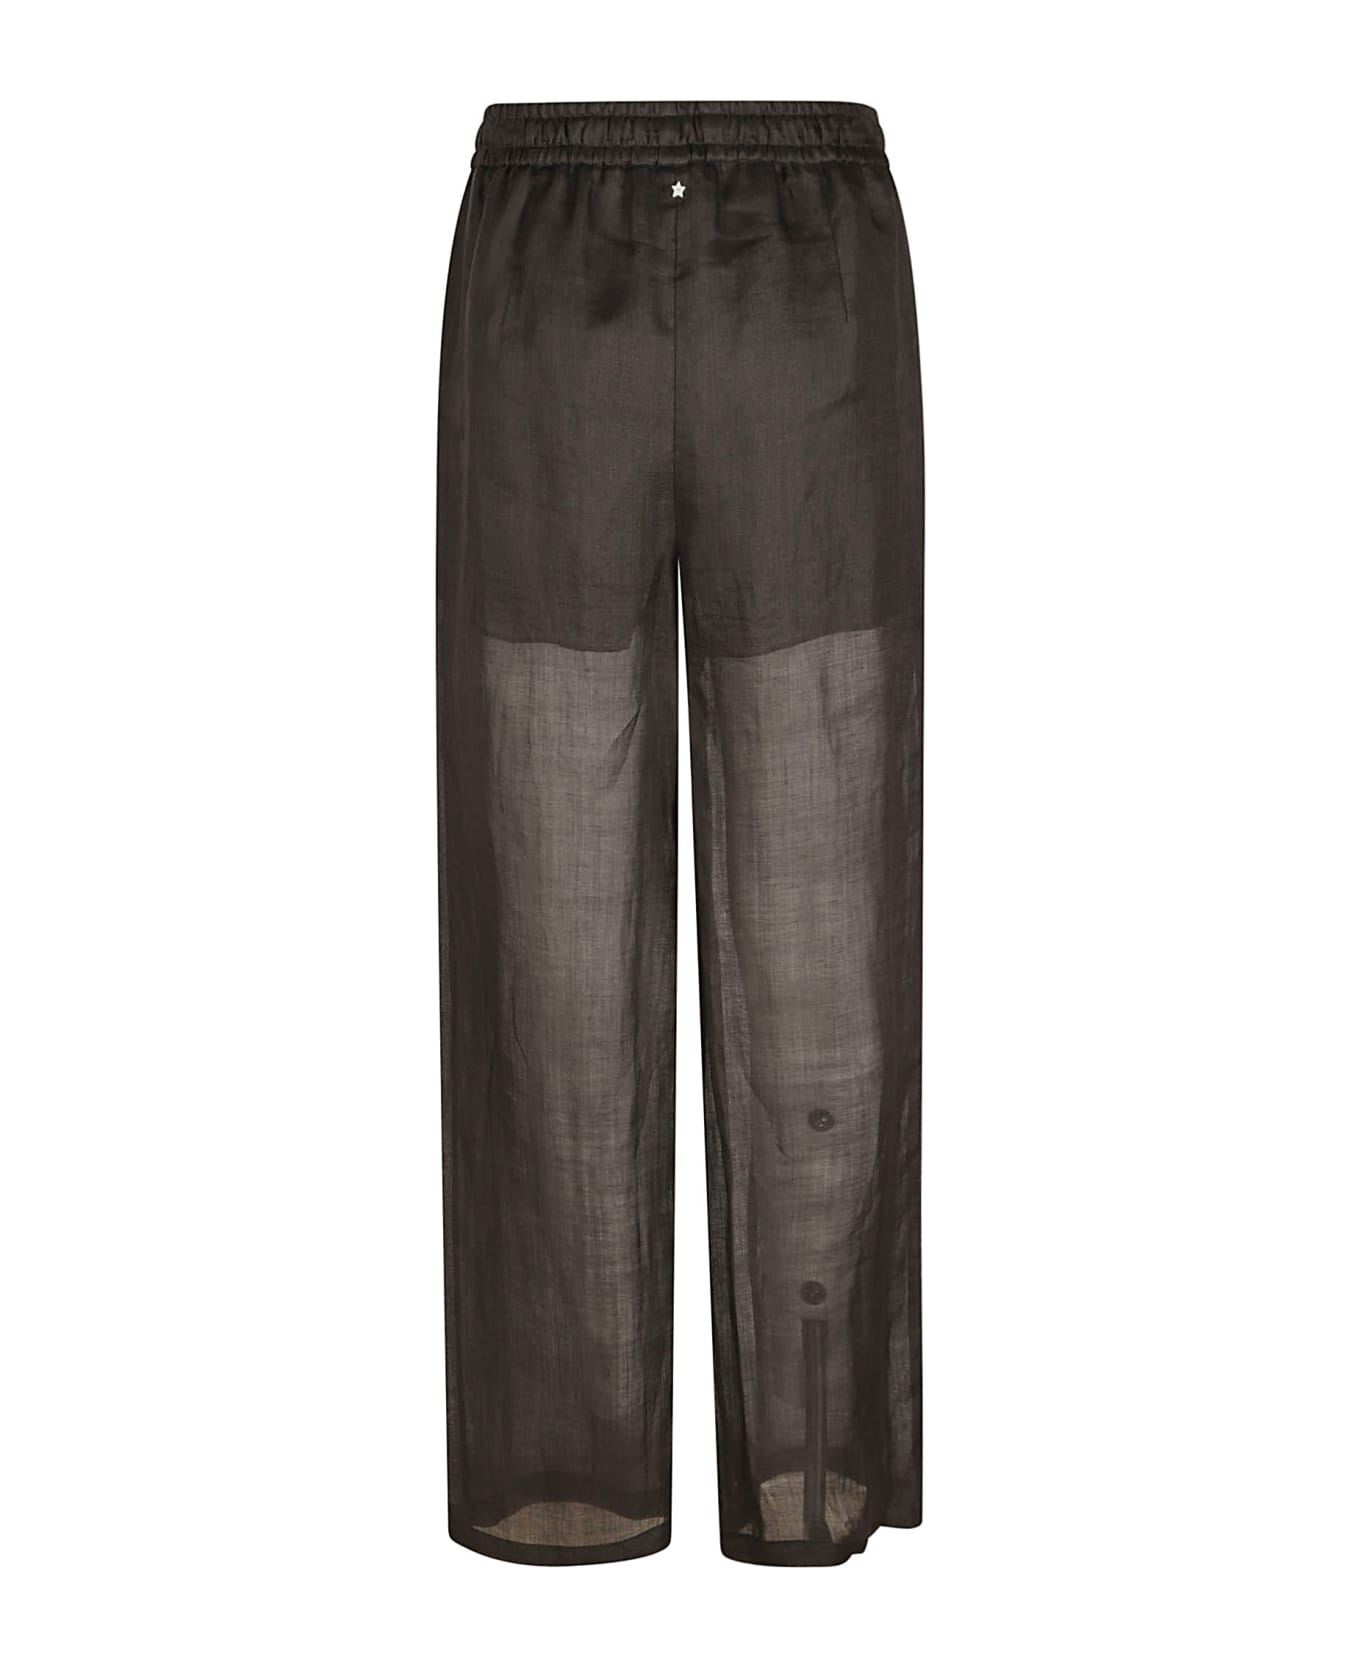 Lorena Antoniazzi Straight Laced Trousers - Black